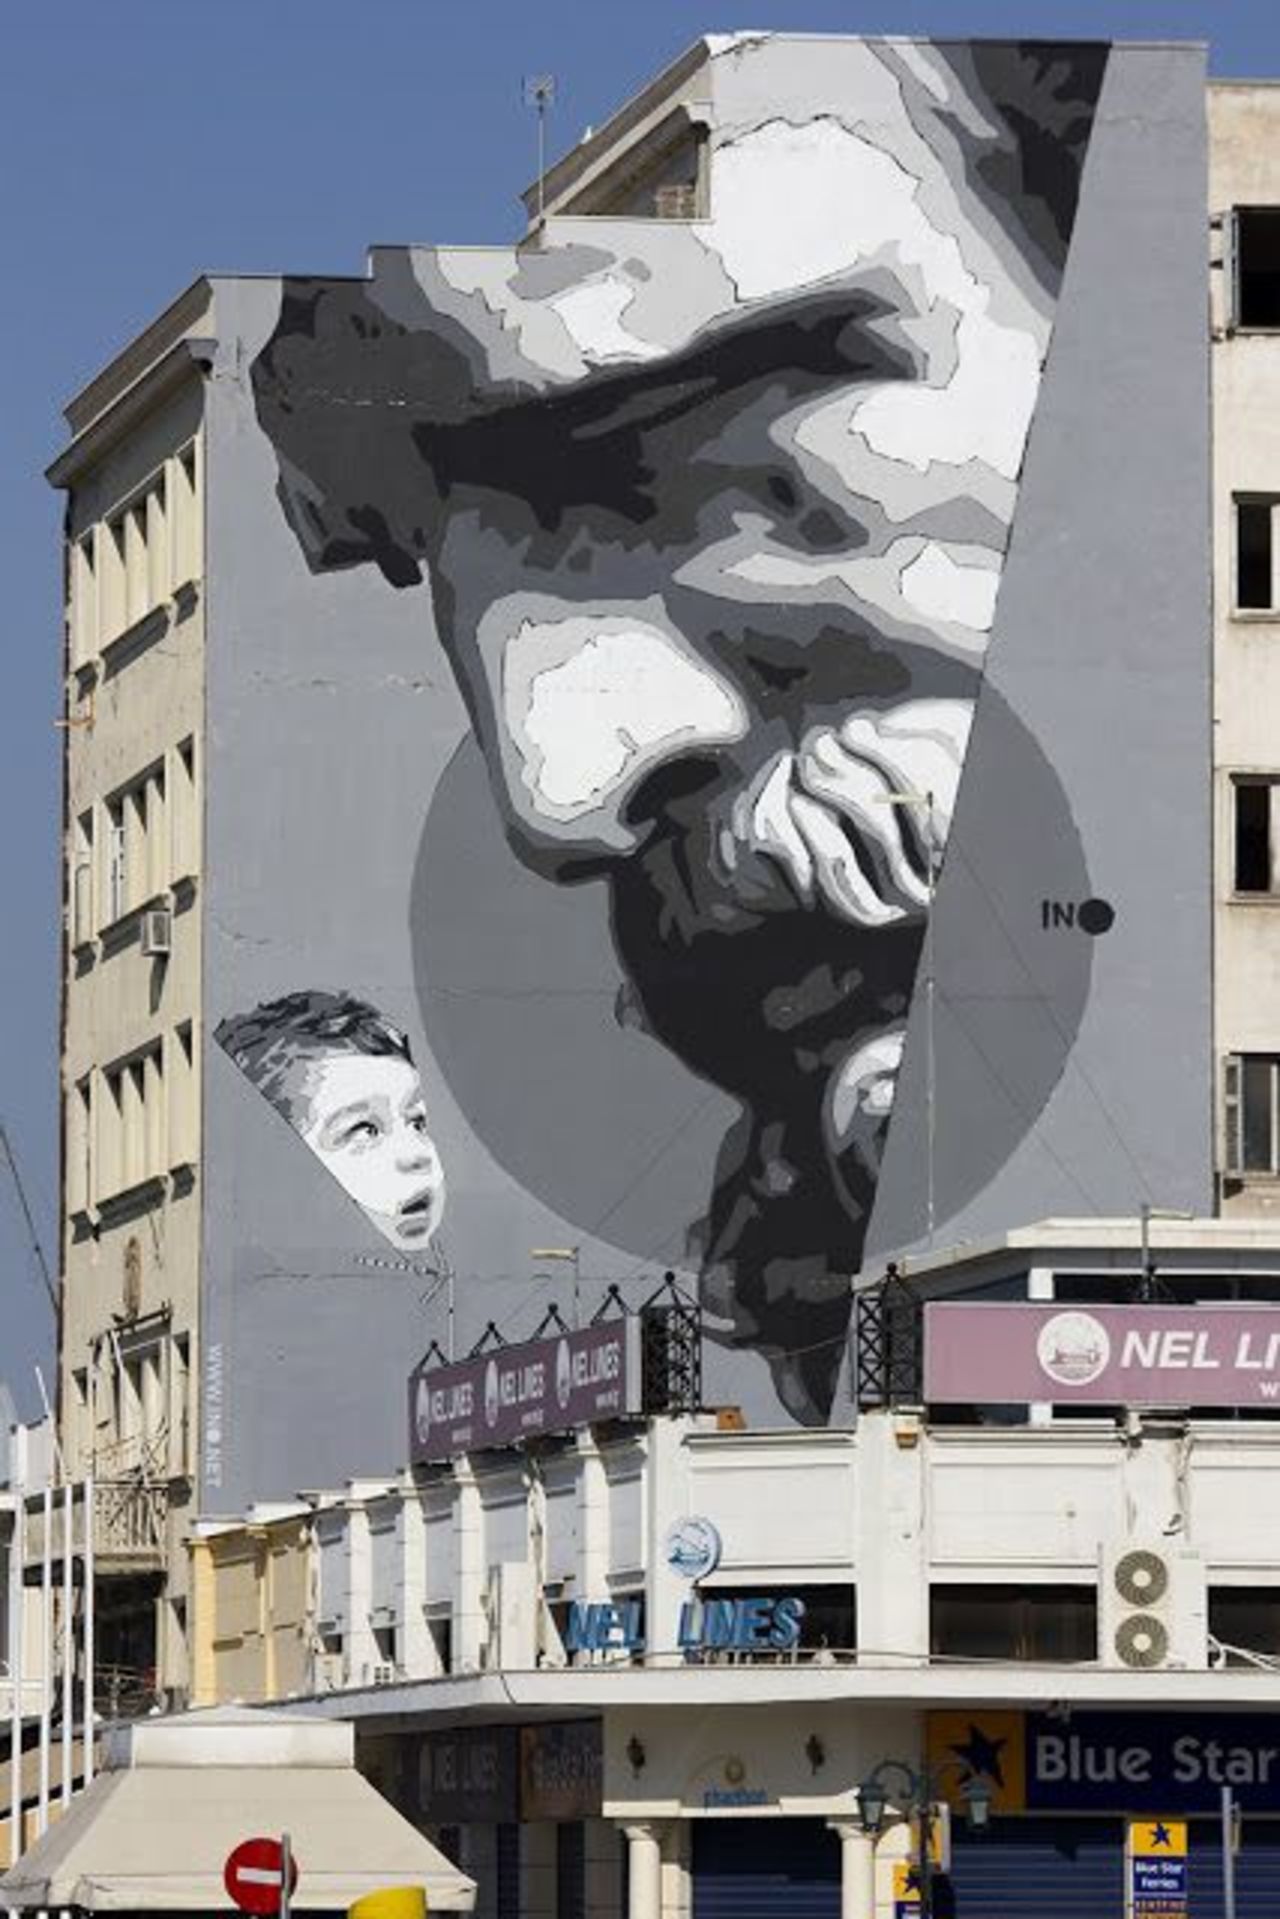 "We Have The Power", a new mural by iNO in Piraeus Port, Greece#Inktober #streetart #mural #graffiti https://t.co/mqptRWyBMY